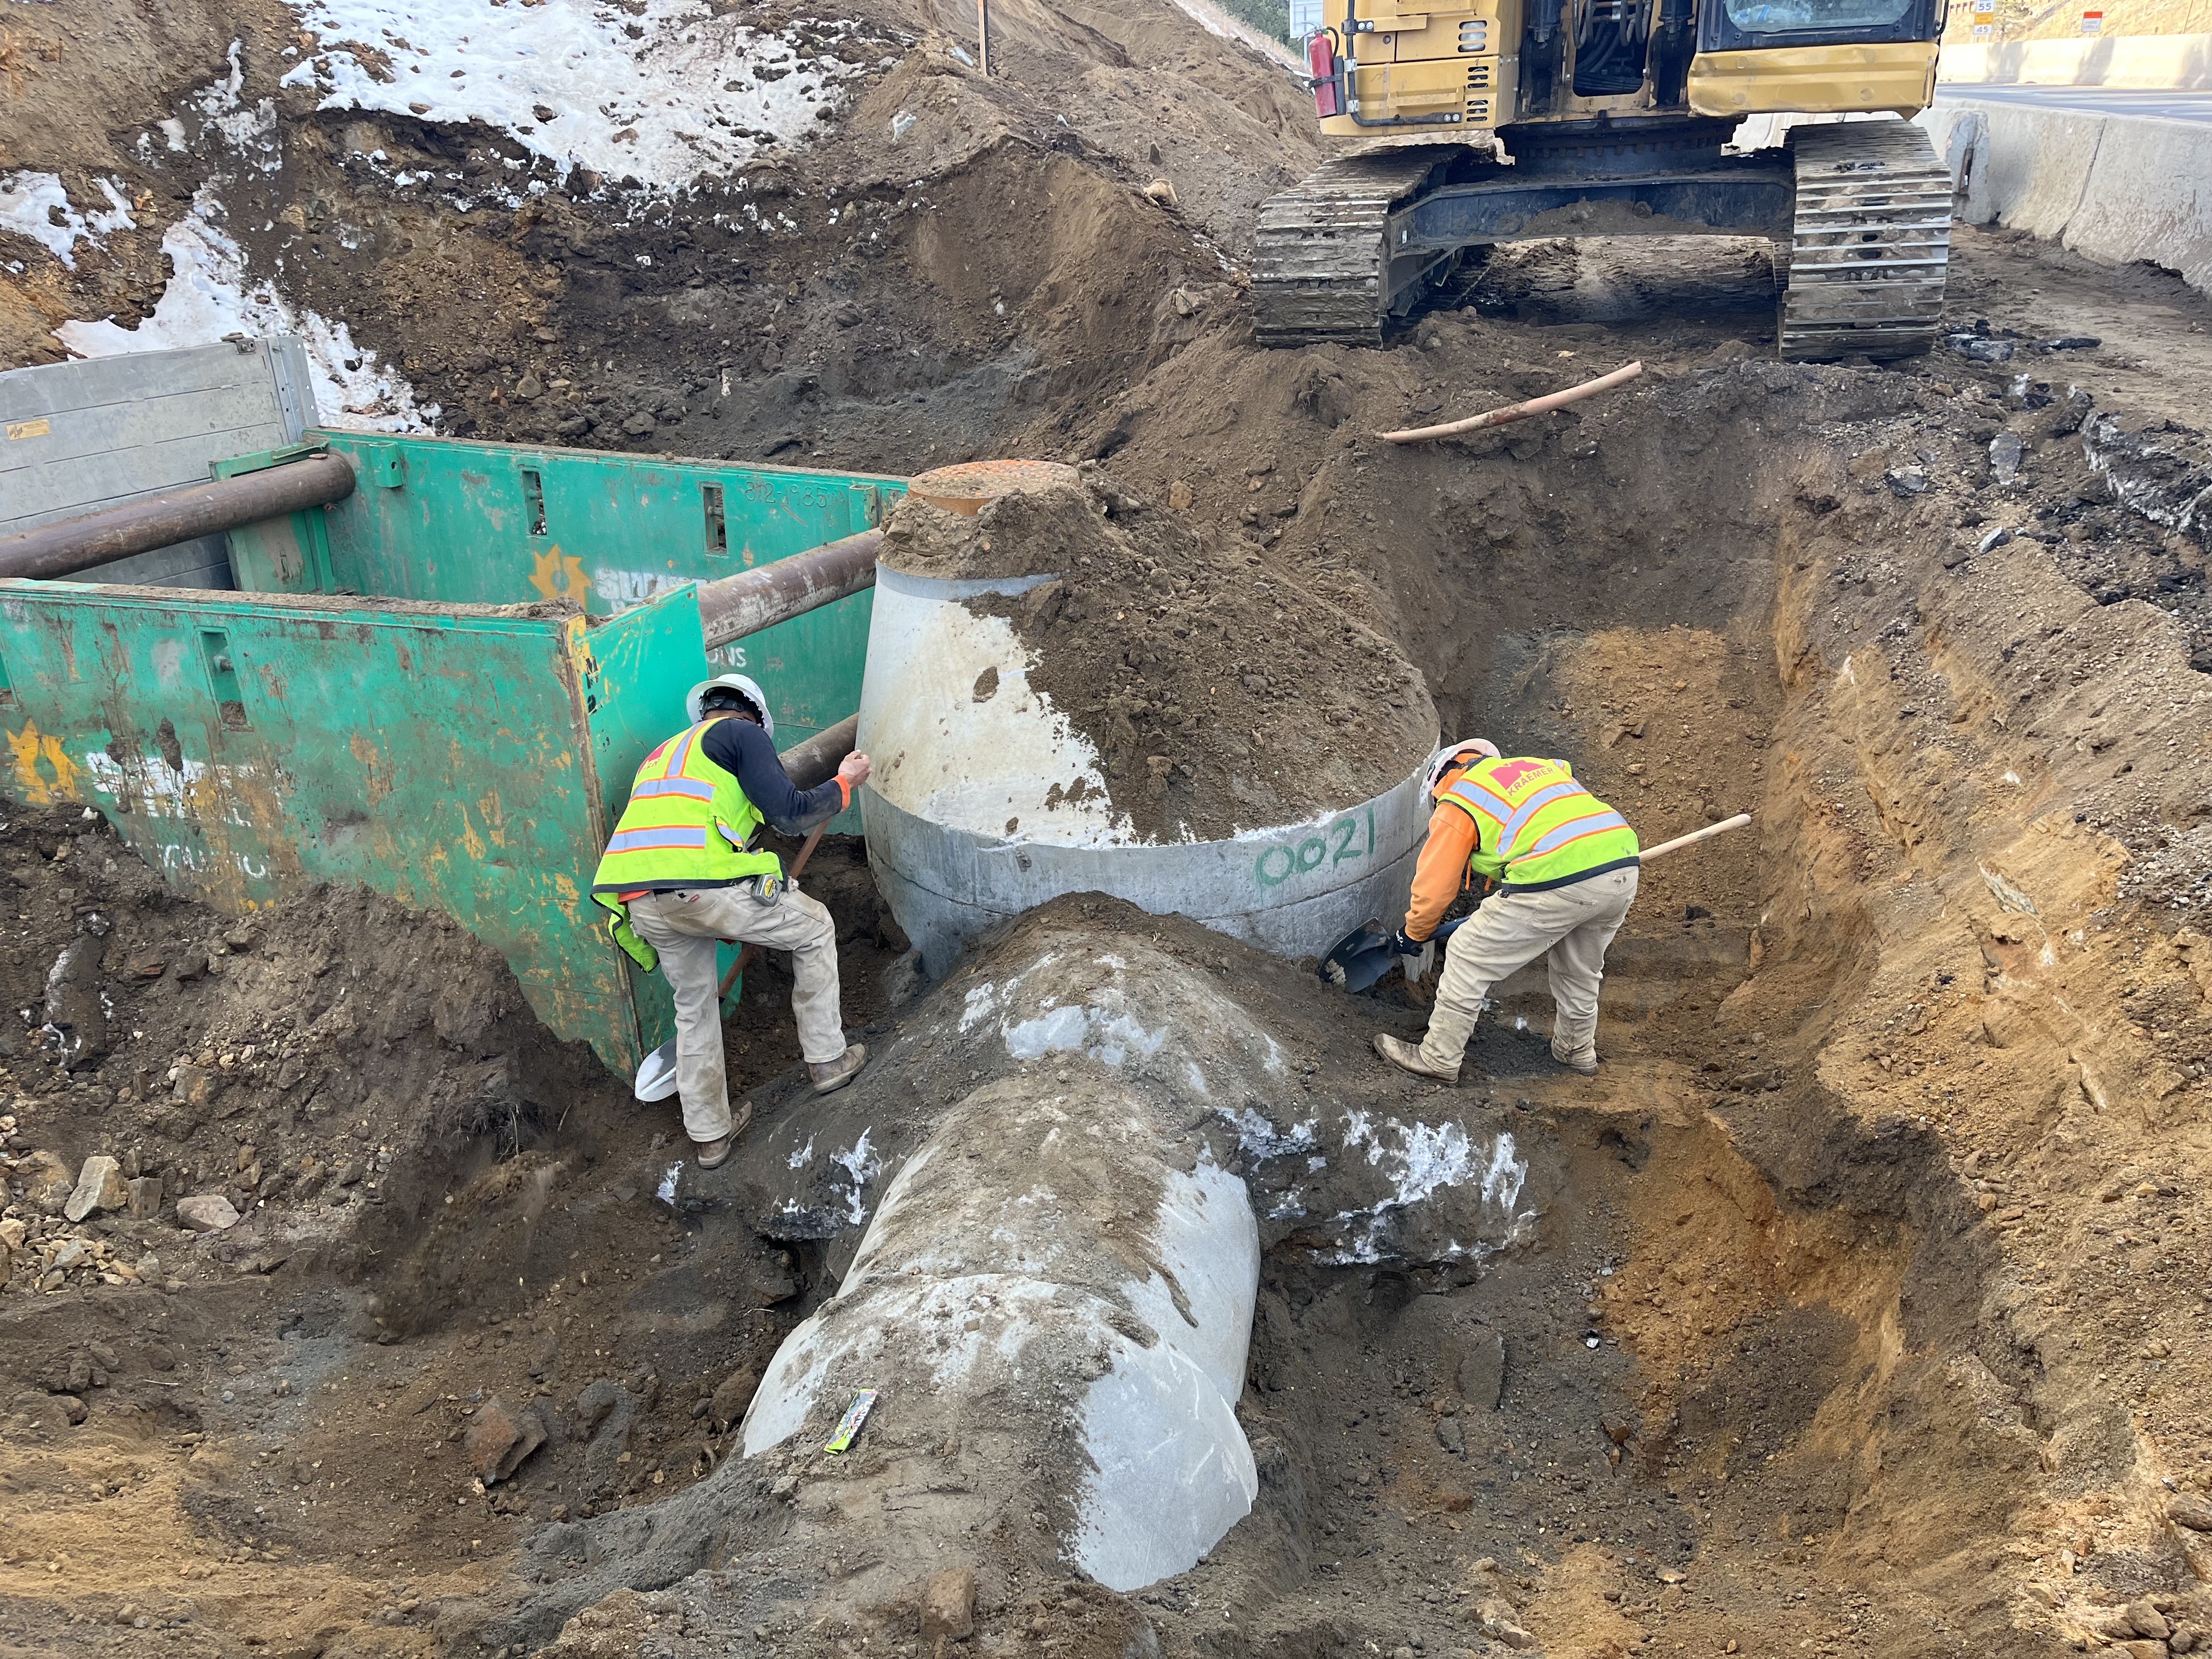 231221_Workers digging drainage_I-70 Floyd Hill.jpg detail image